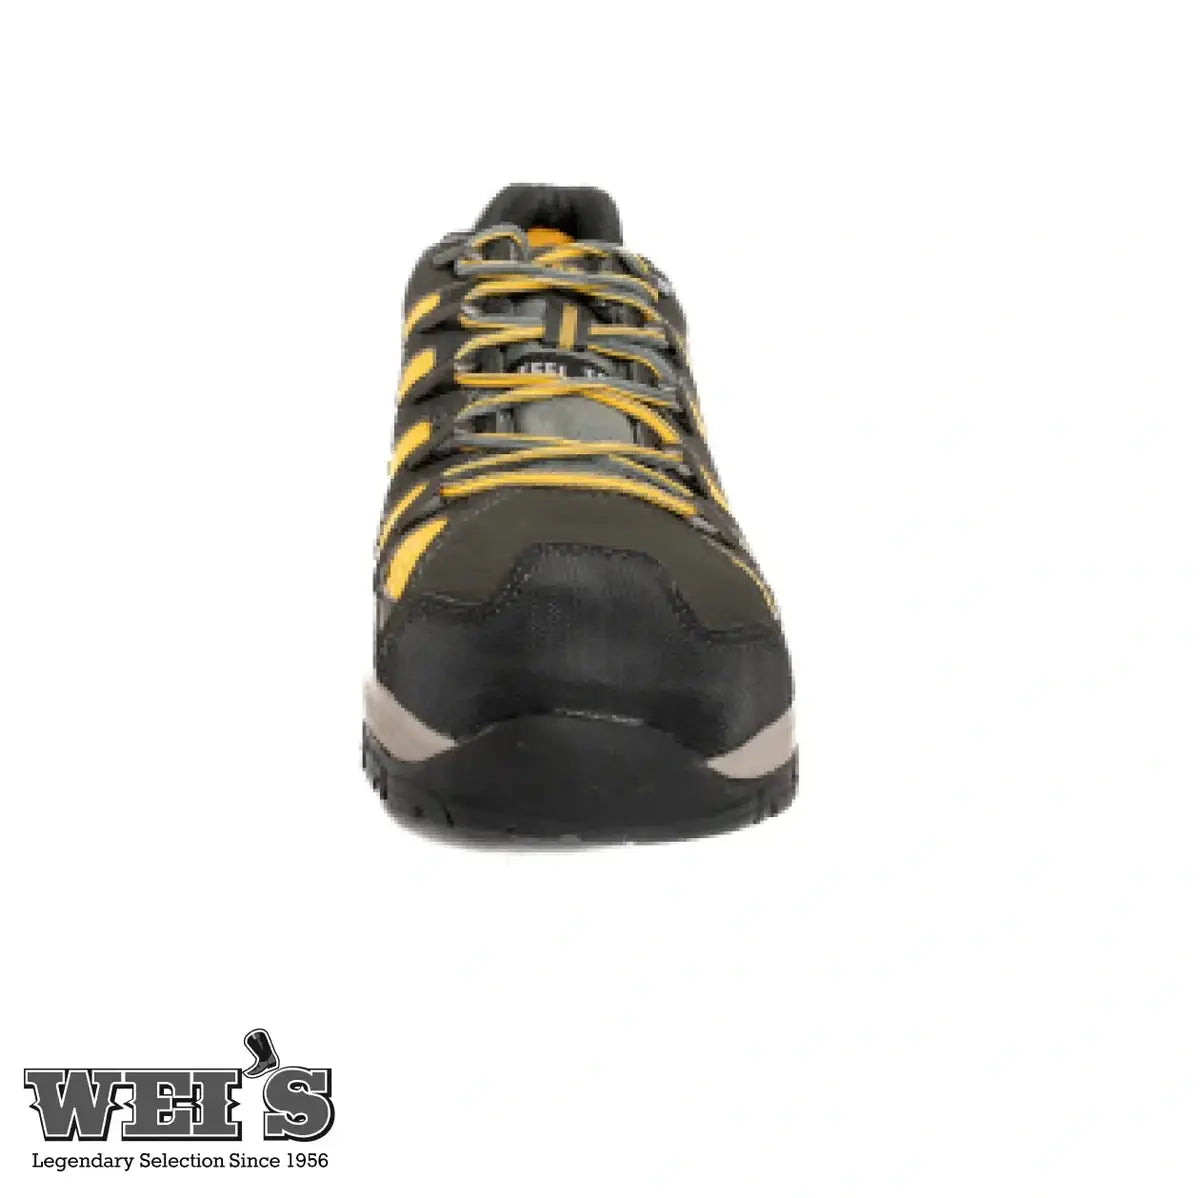 CAT Linchpin CSA Work Shoe P715034 - Clearance - Clearance